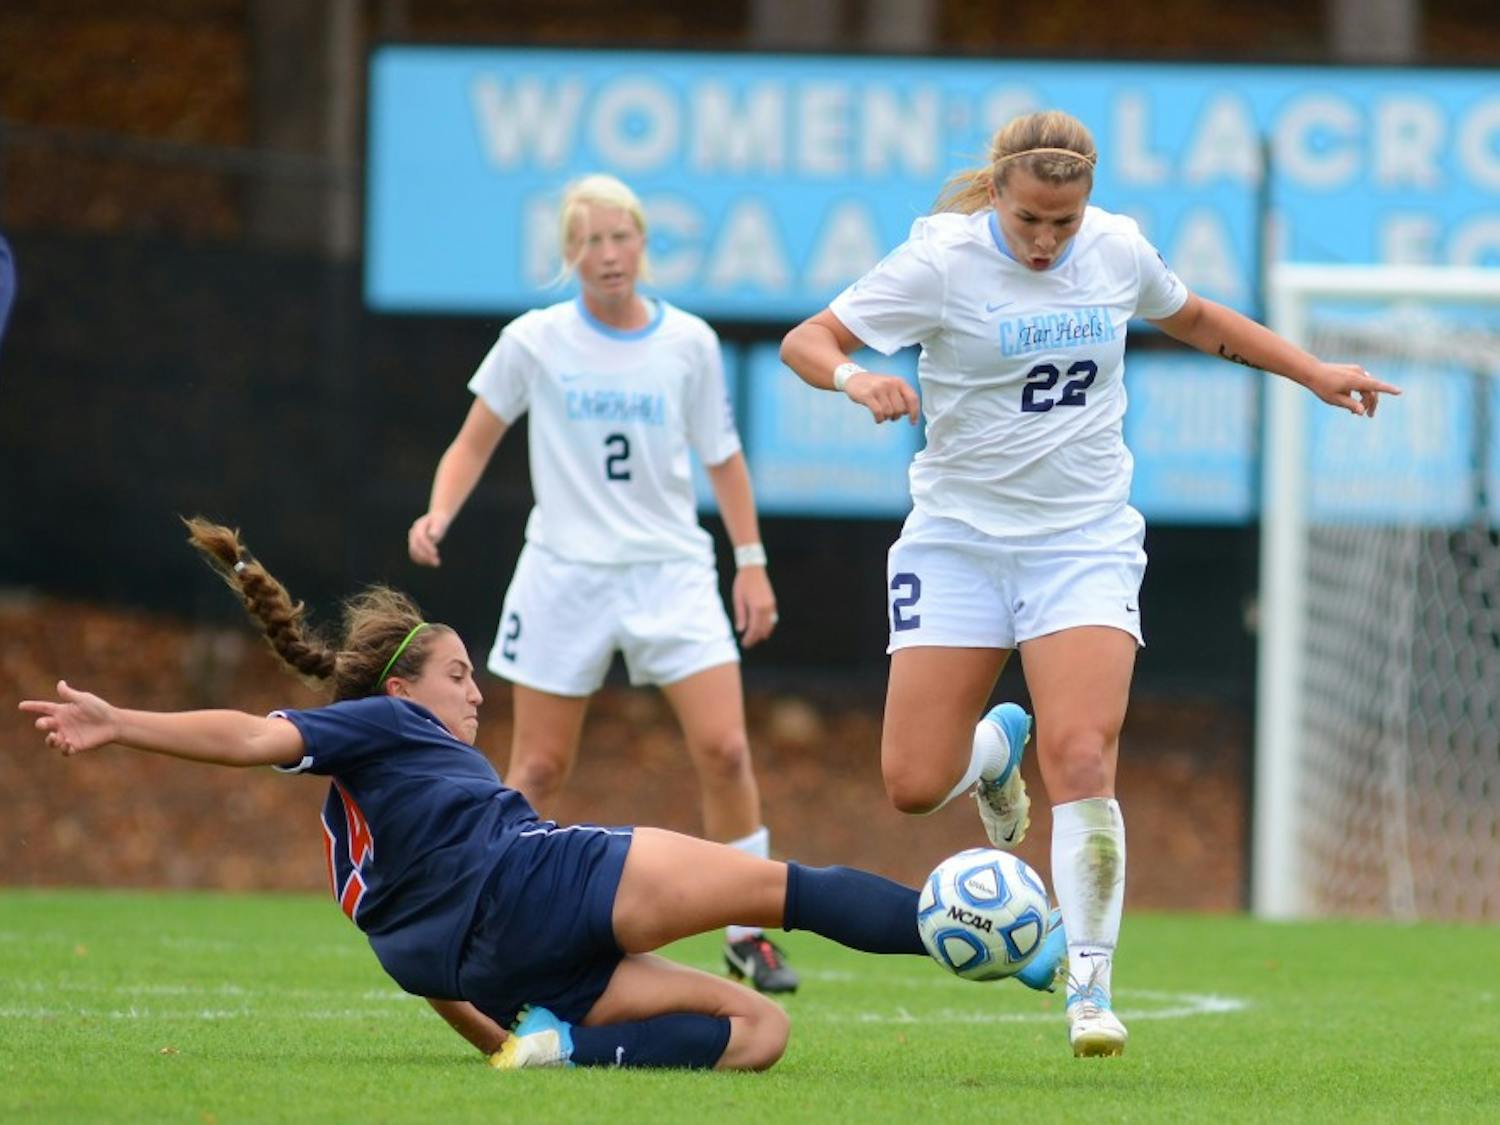 	4th seeded UNC Women&#8217;s Soccer lost 1-0 to 5th seeded UVA in the quarterfinals of the 2012 ACC Tournament on October 28th, 2012 in Chapel Hill, North Carolina. 